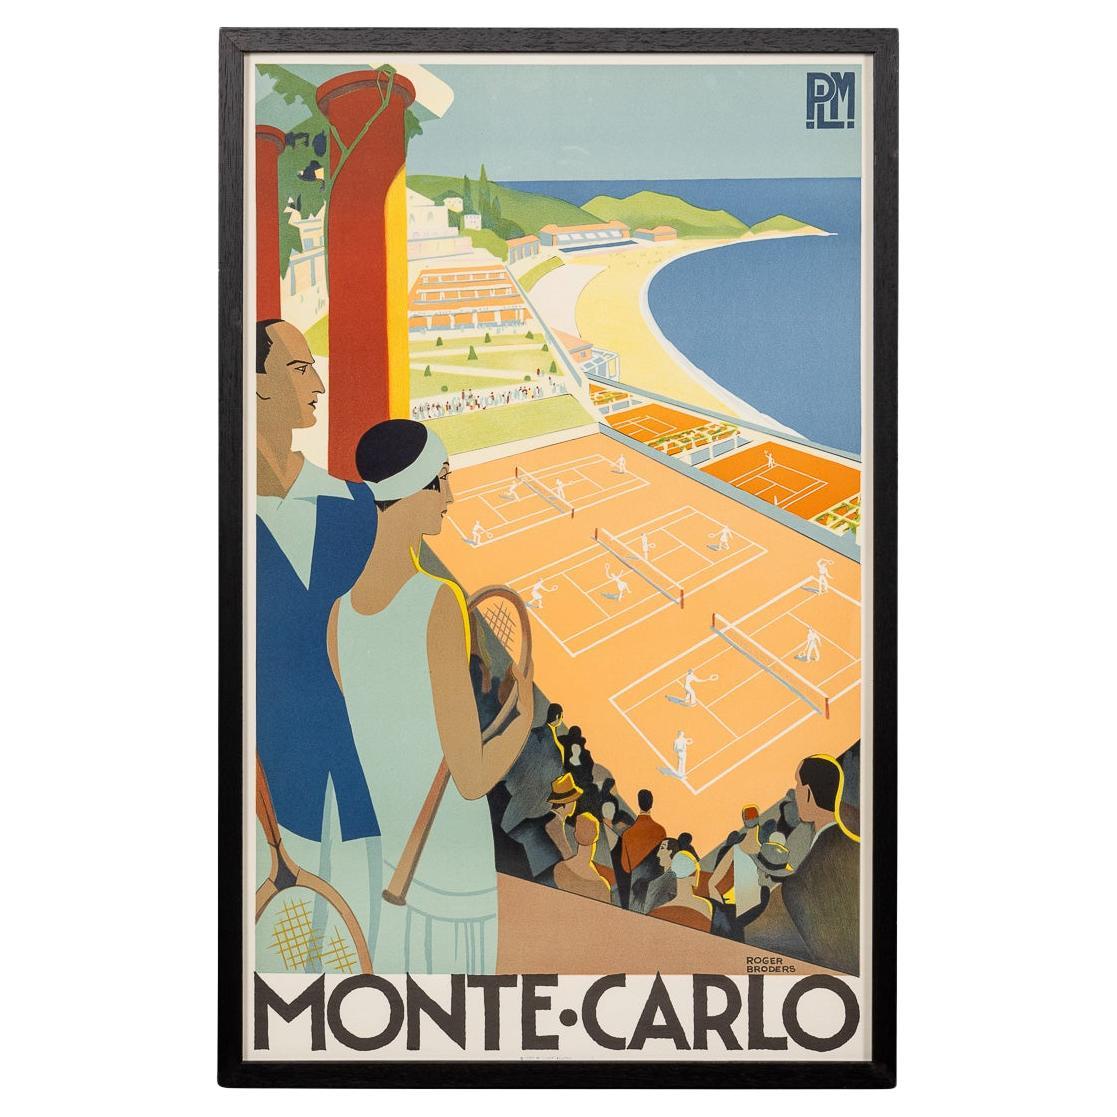 20th Century Reprint Of Roger Broder's Monte Carlo Plm Poster, c.1983